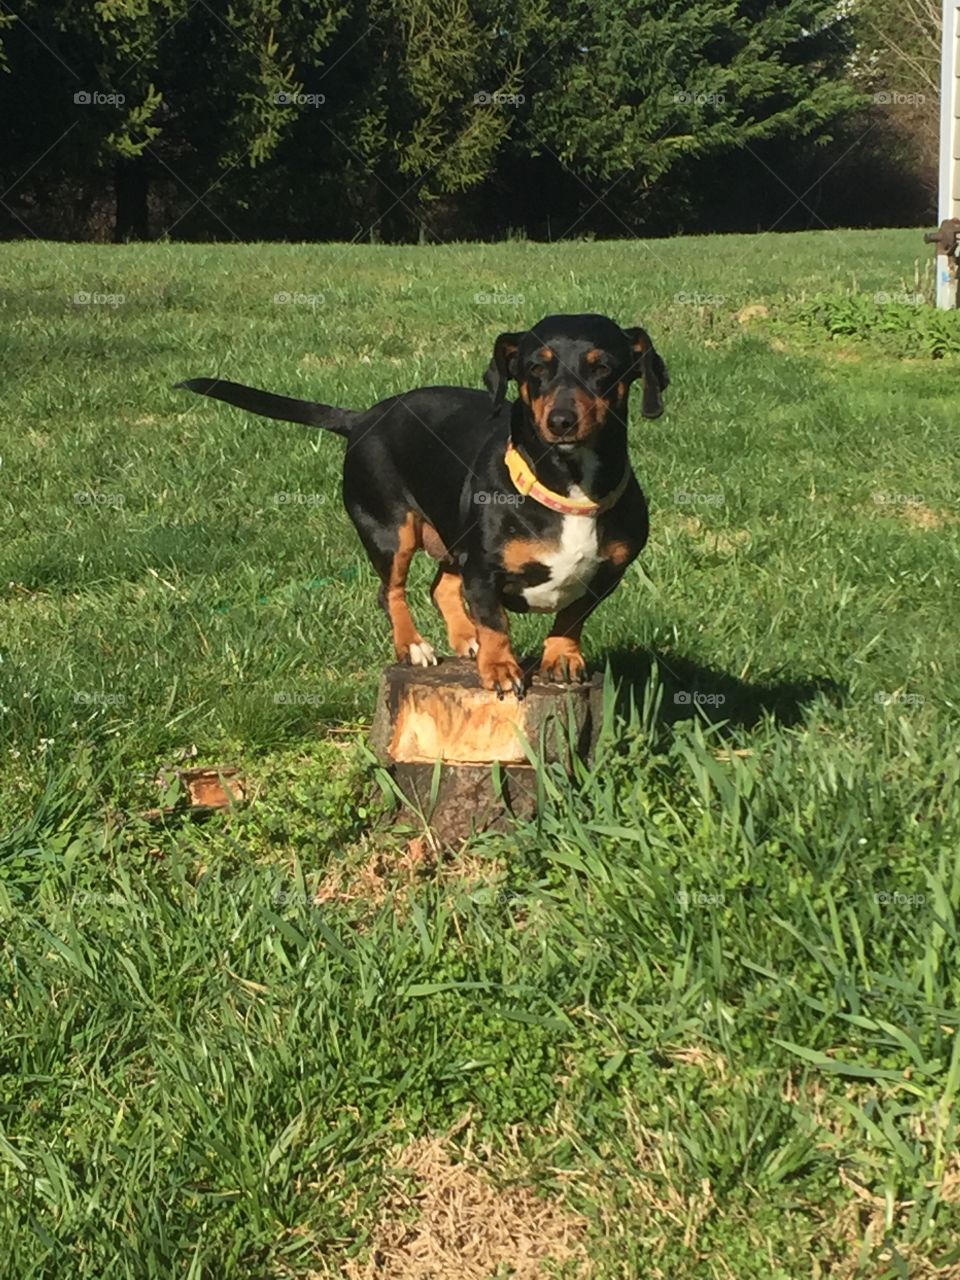  "Milli" standing on a stump to feel taller. 